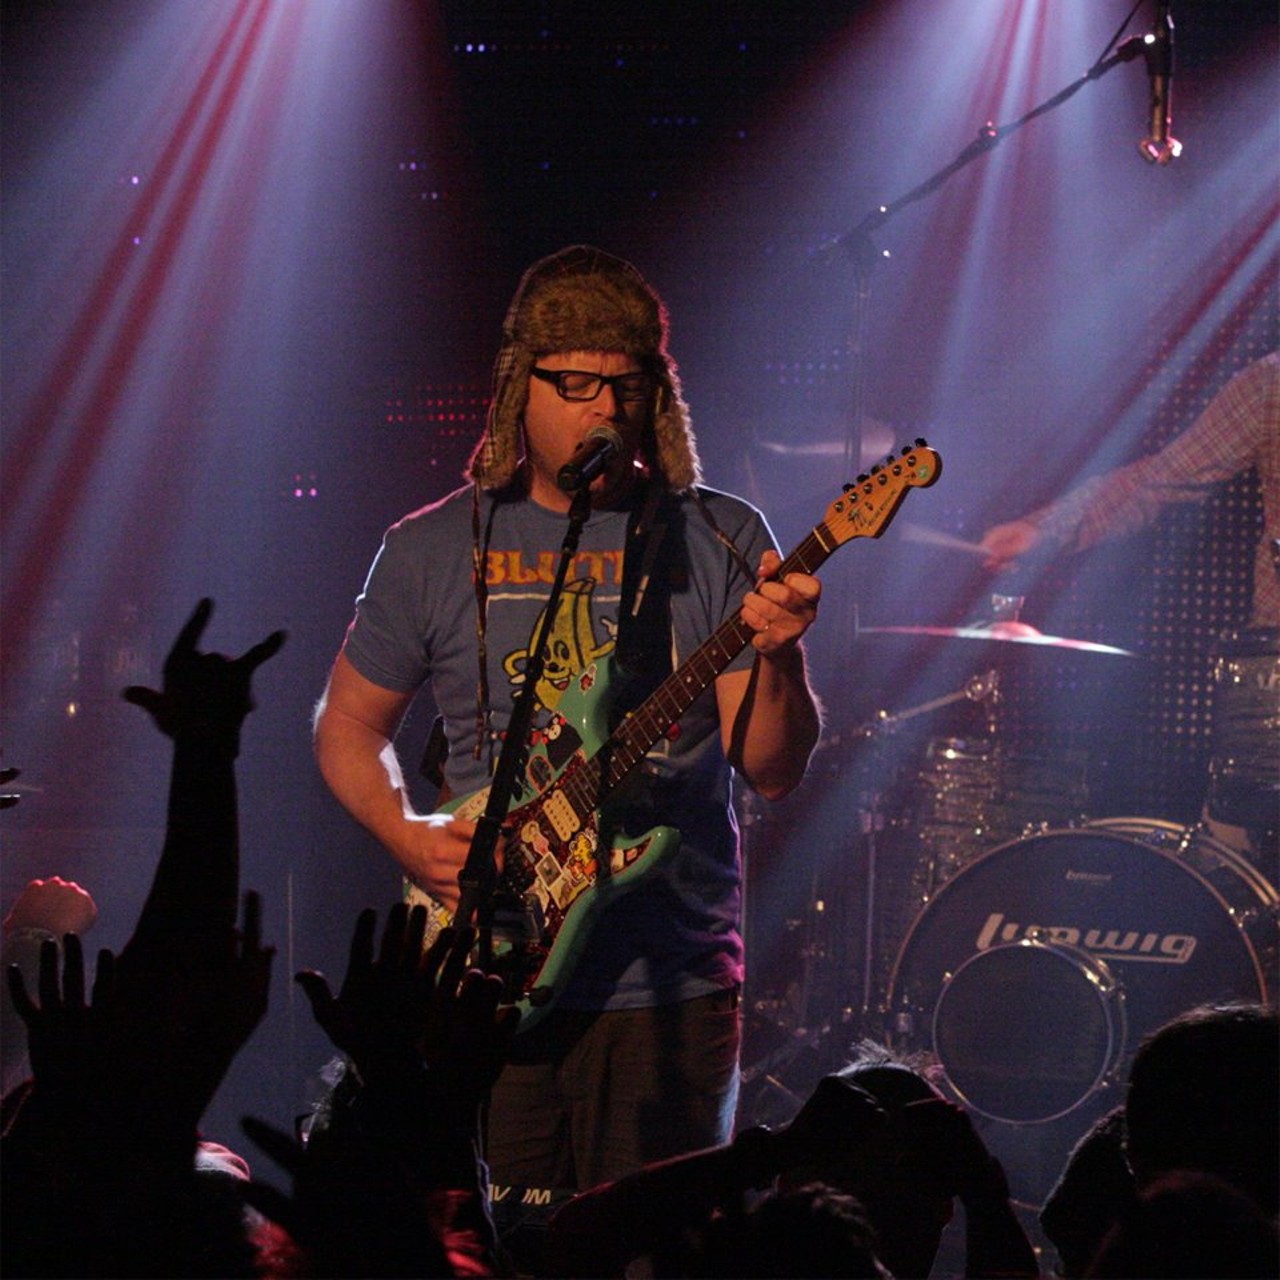 Weezer played at The Odeon multiple times over the years.